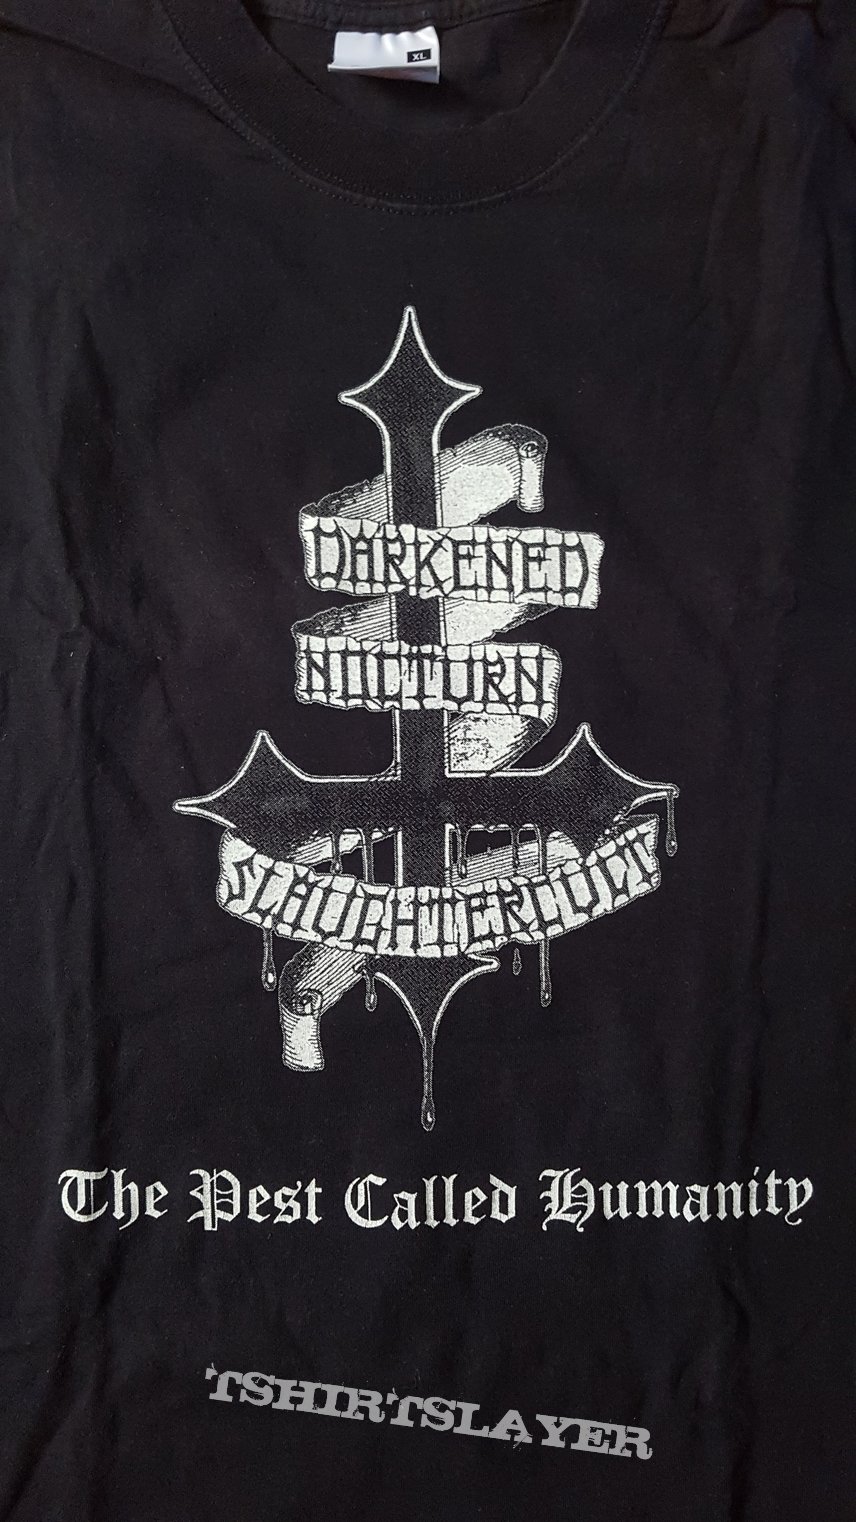 Darkened Nocturn Slaughtercult -The Pest Called Humanity